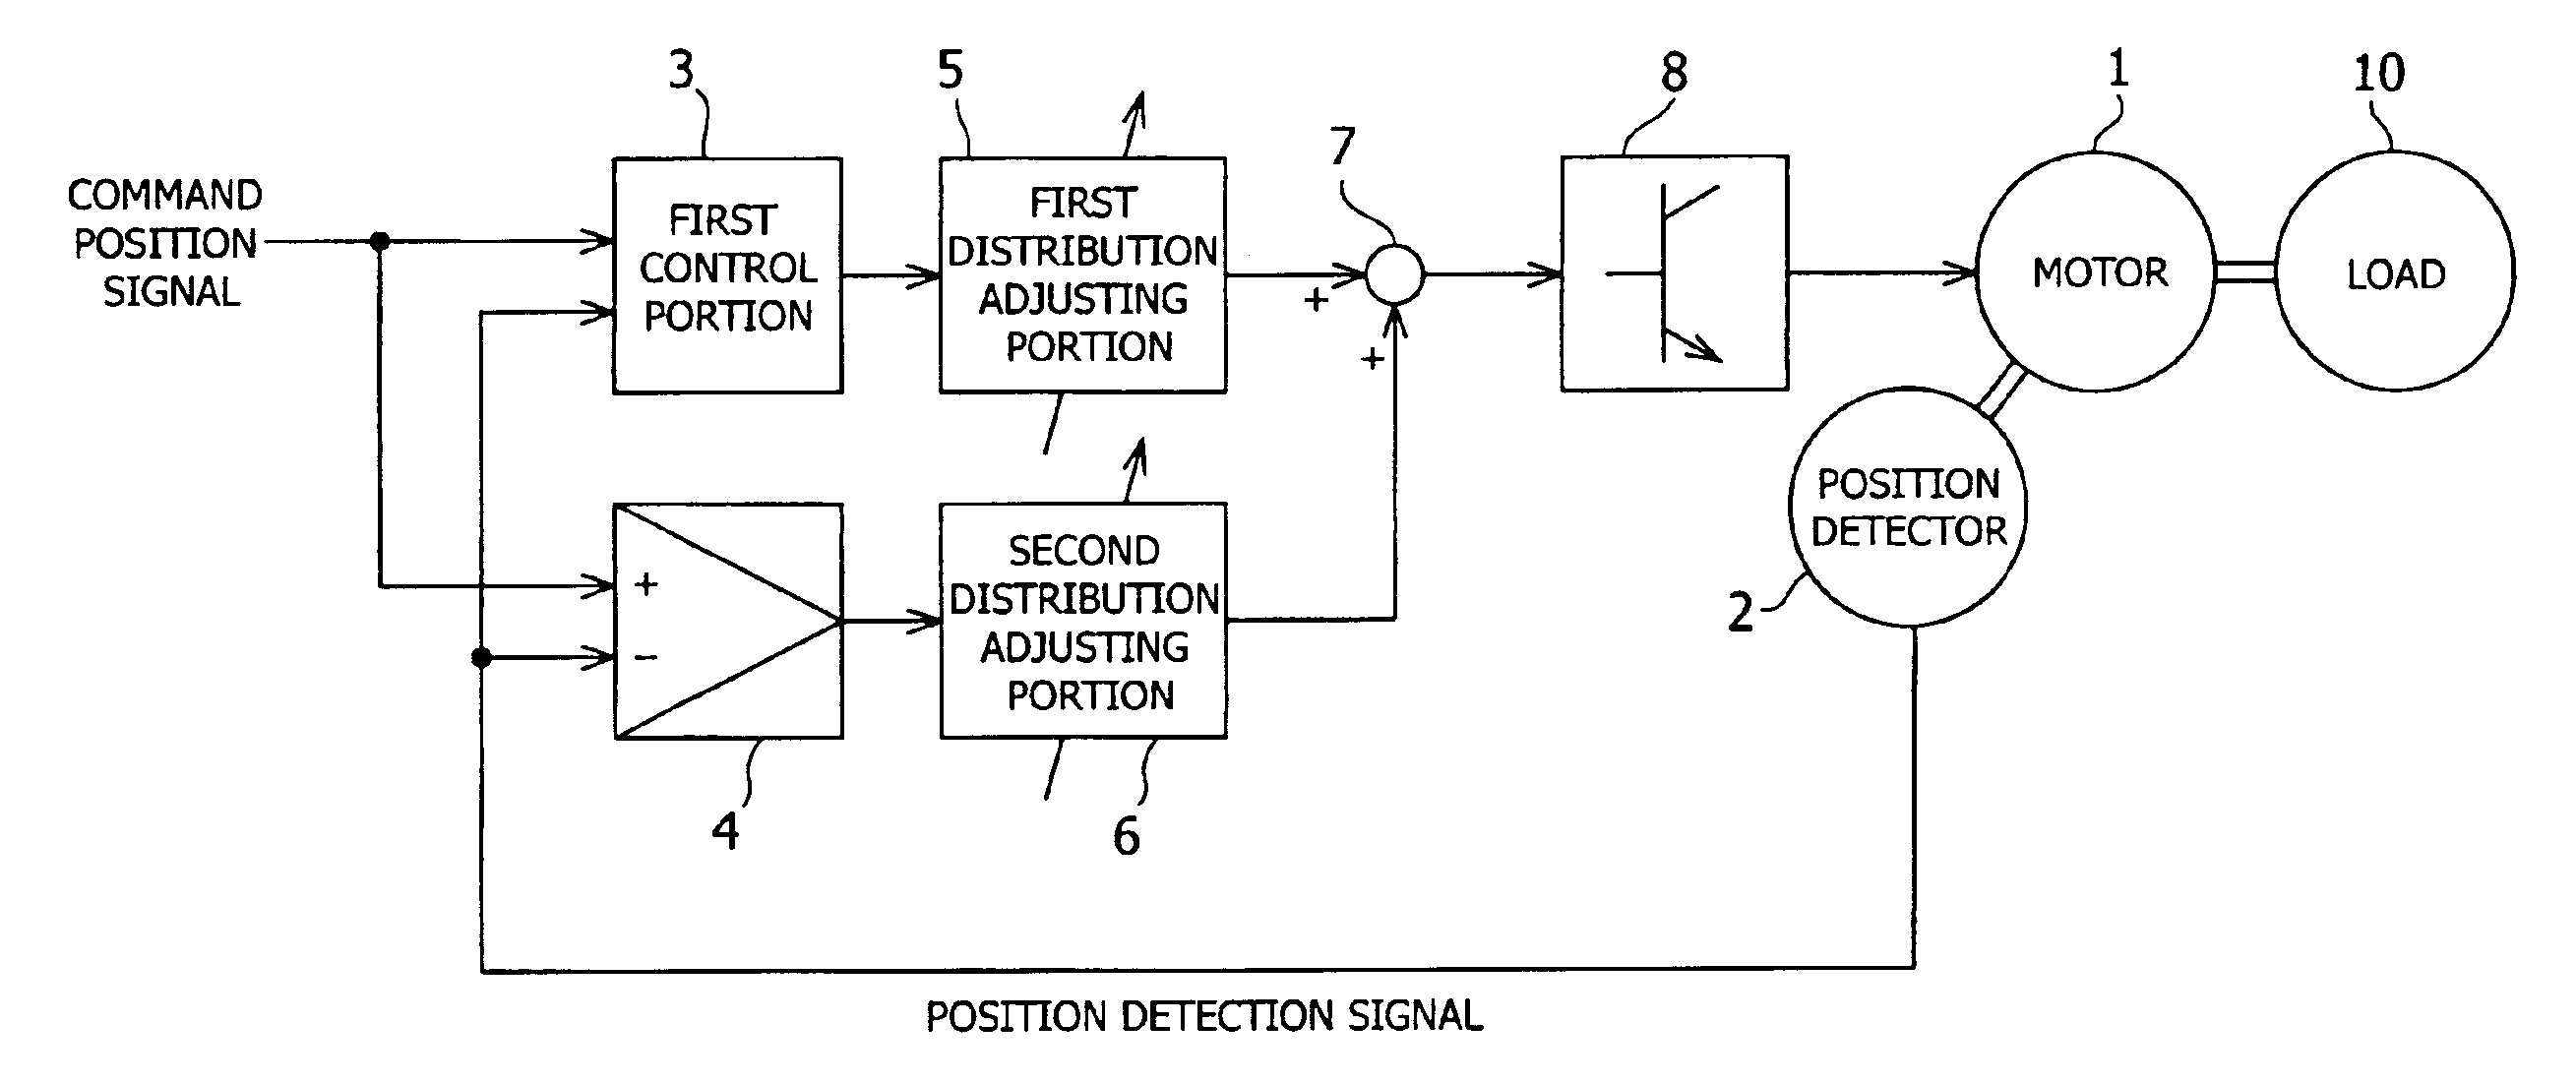 Control device of a position control motor